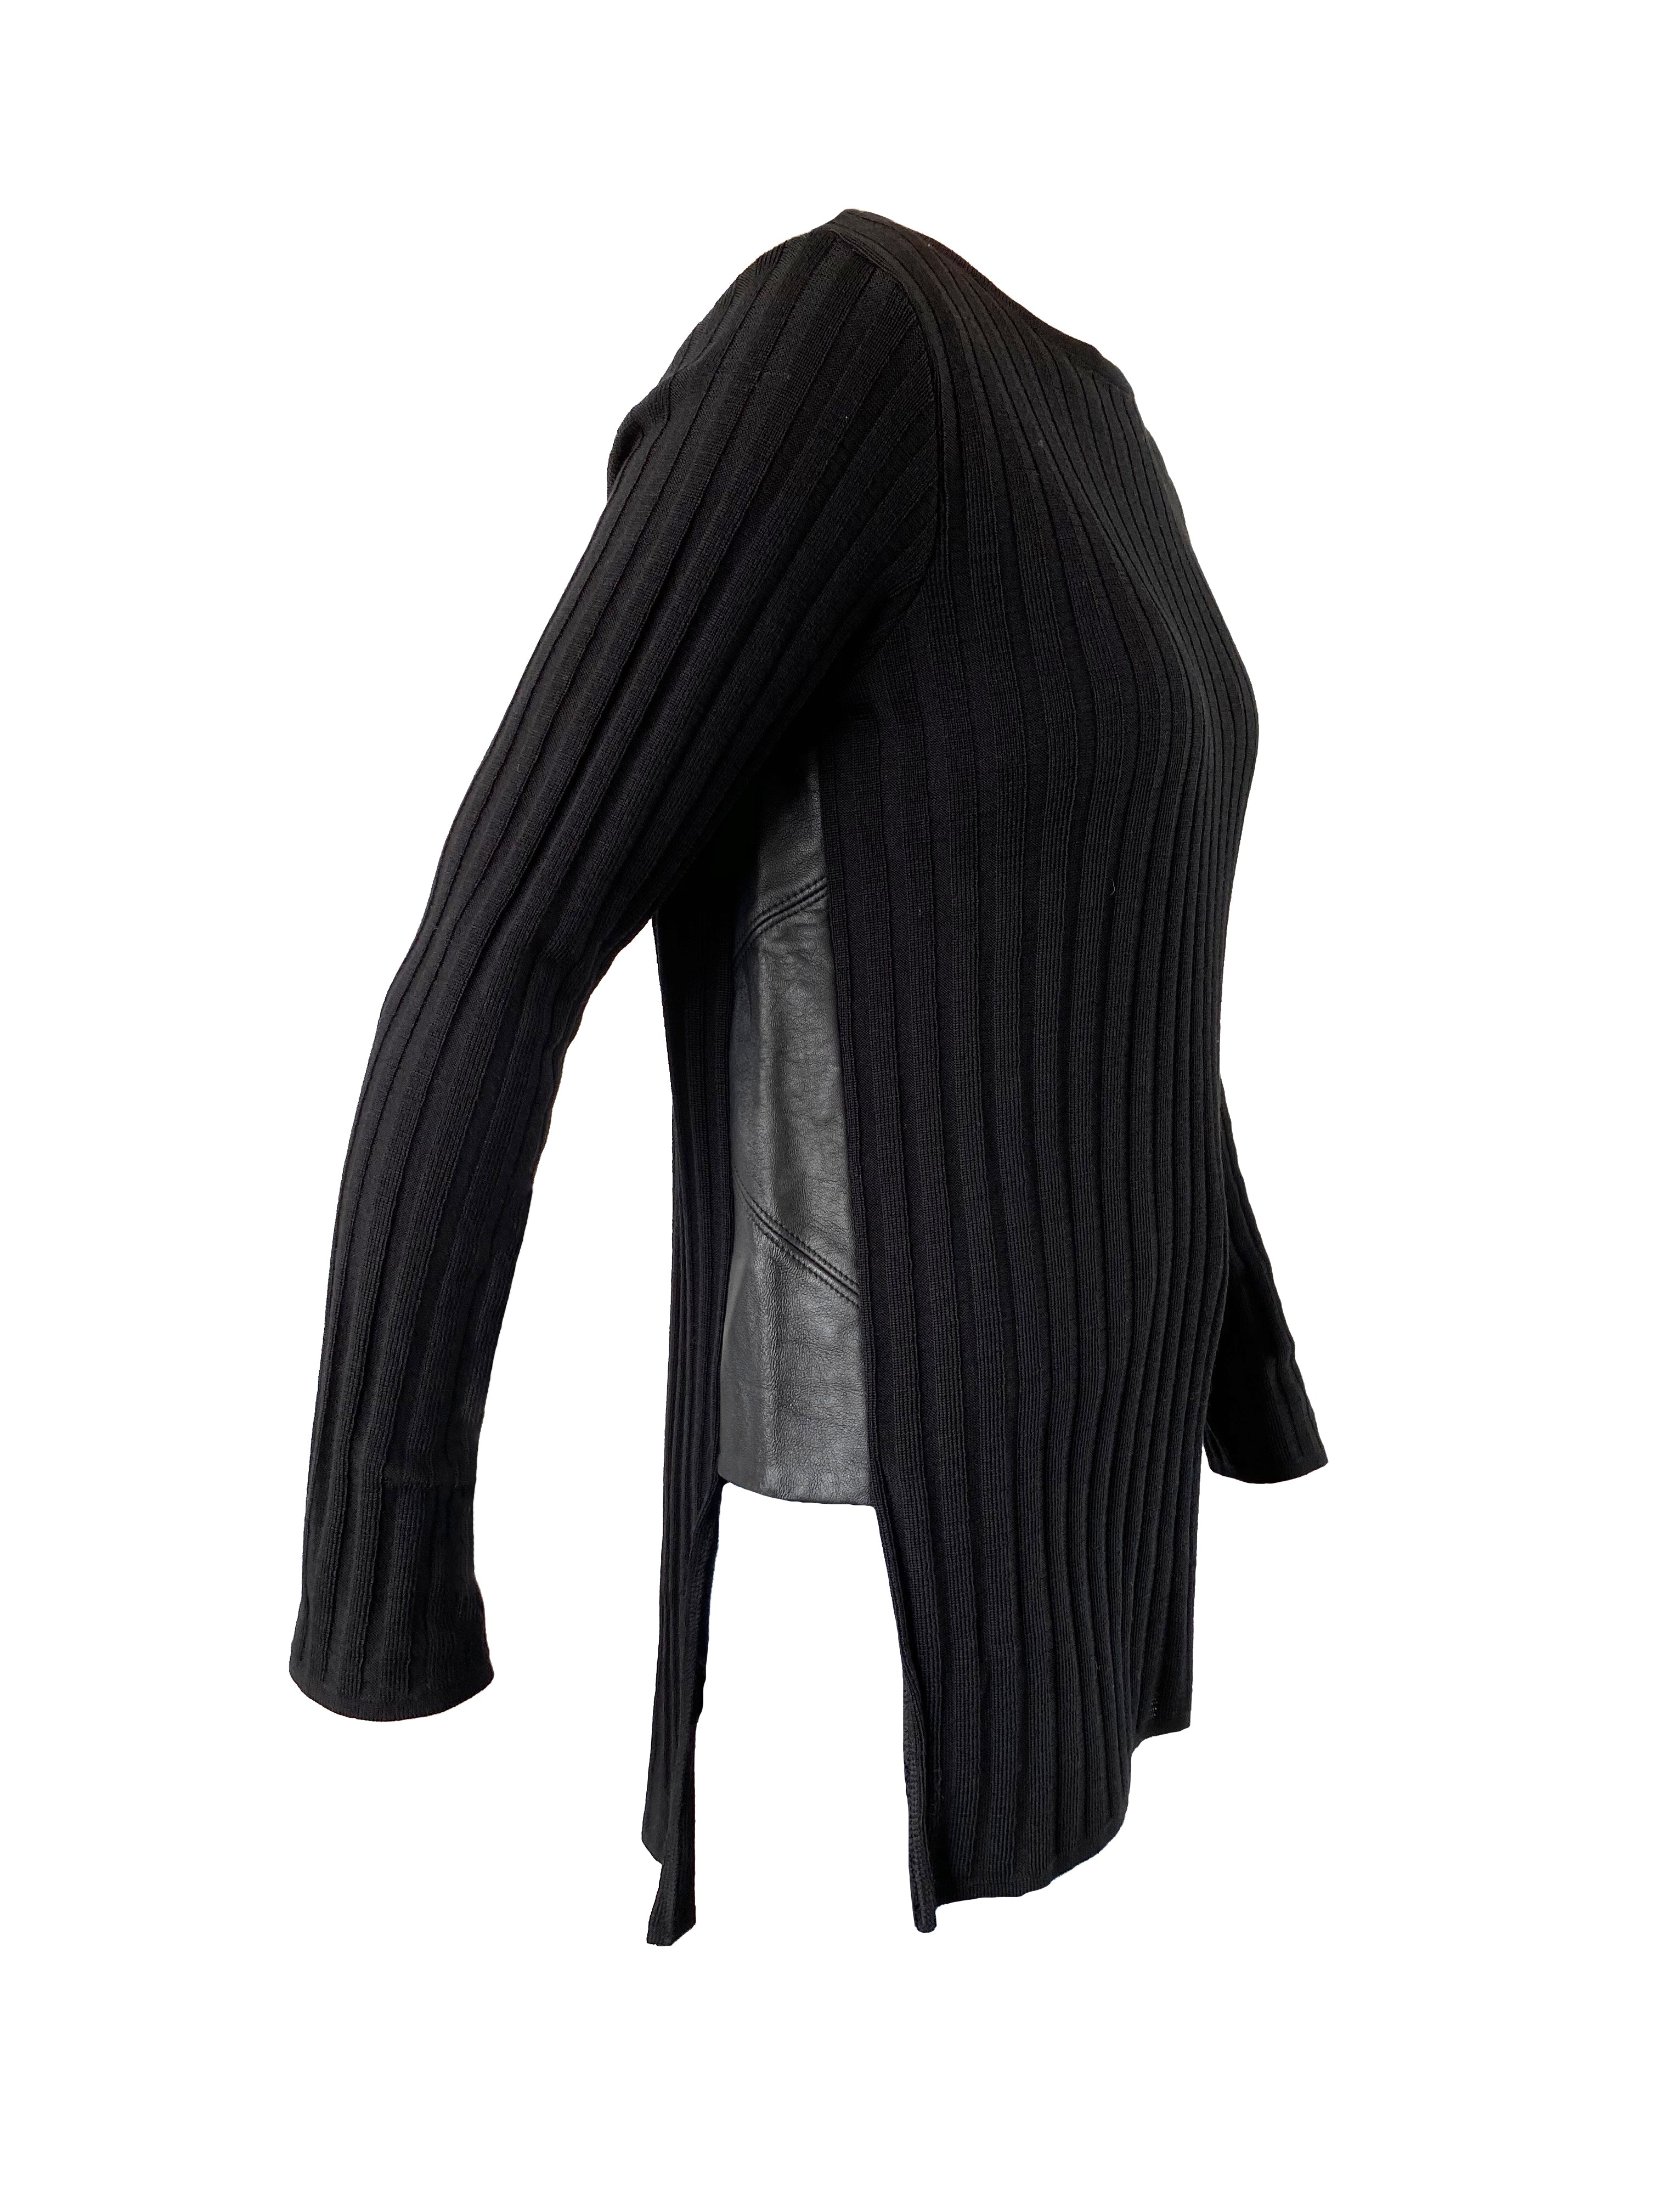 Rib Knit Top with Leather Side Panels